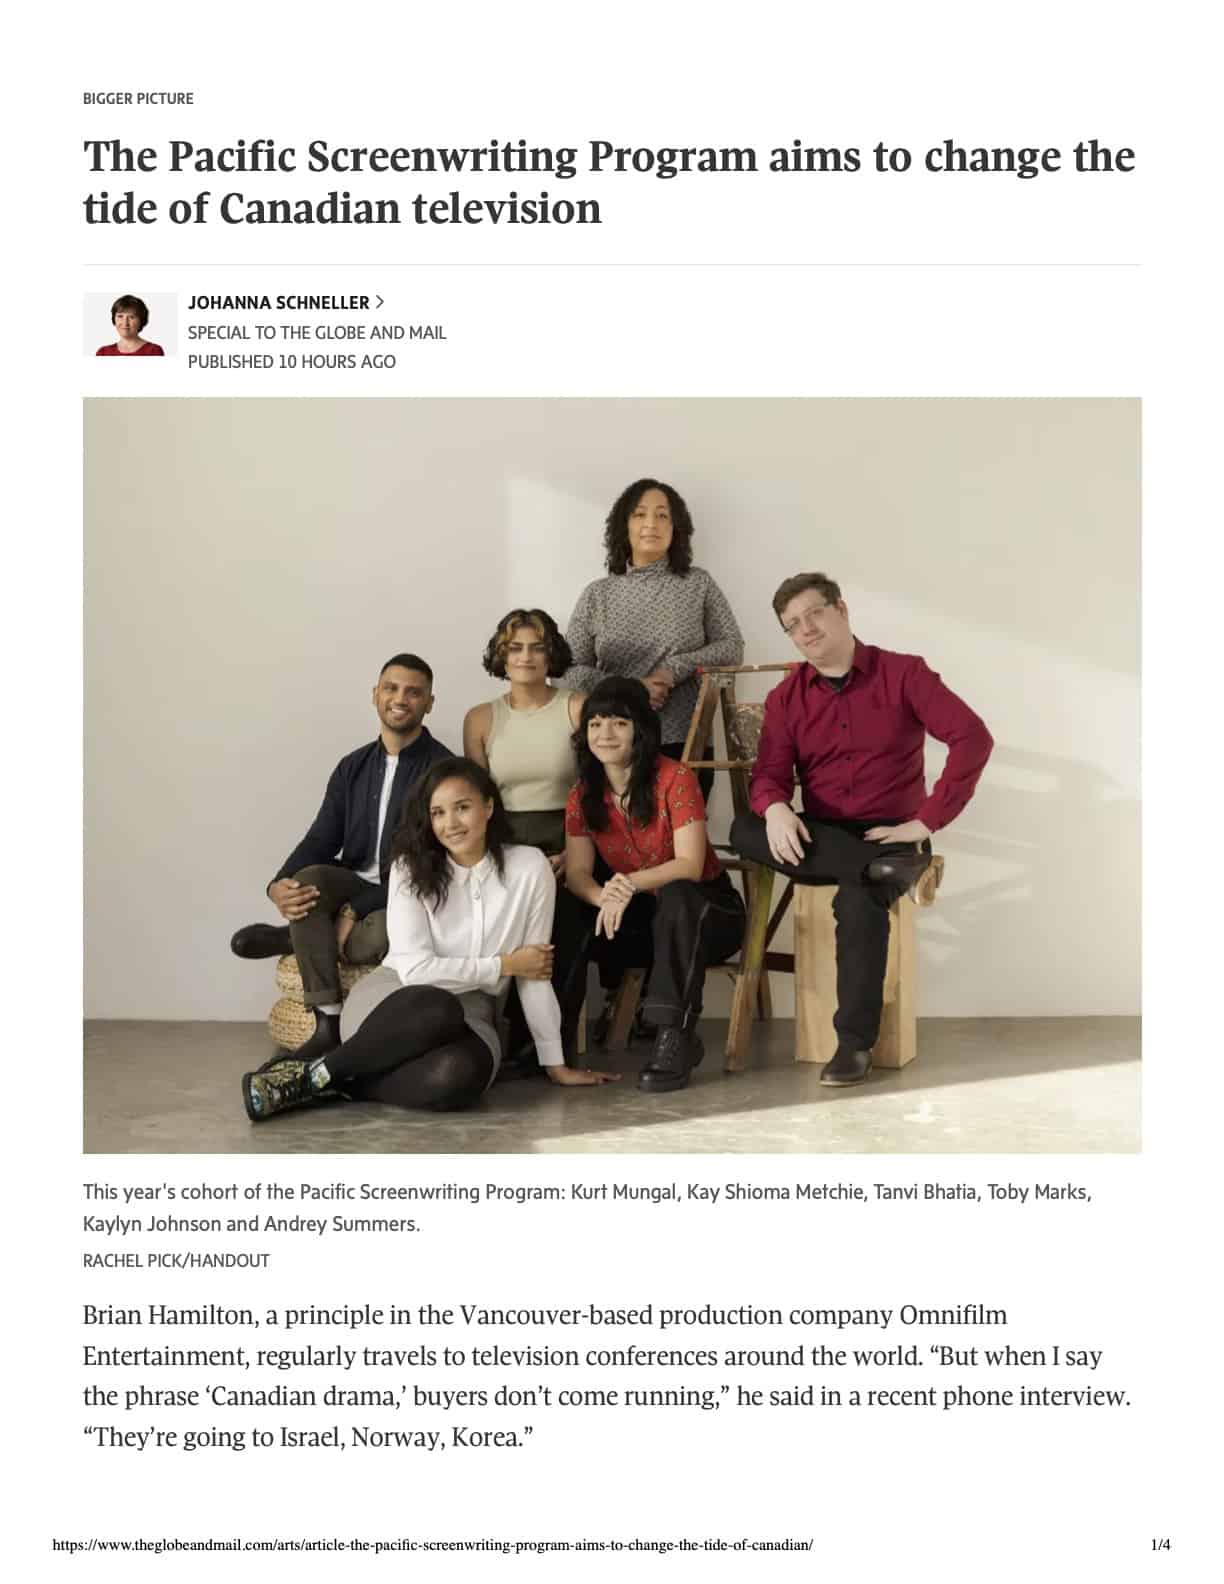 The Pacific Screenwriting Program in The Globe & Mail